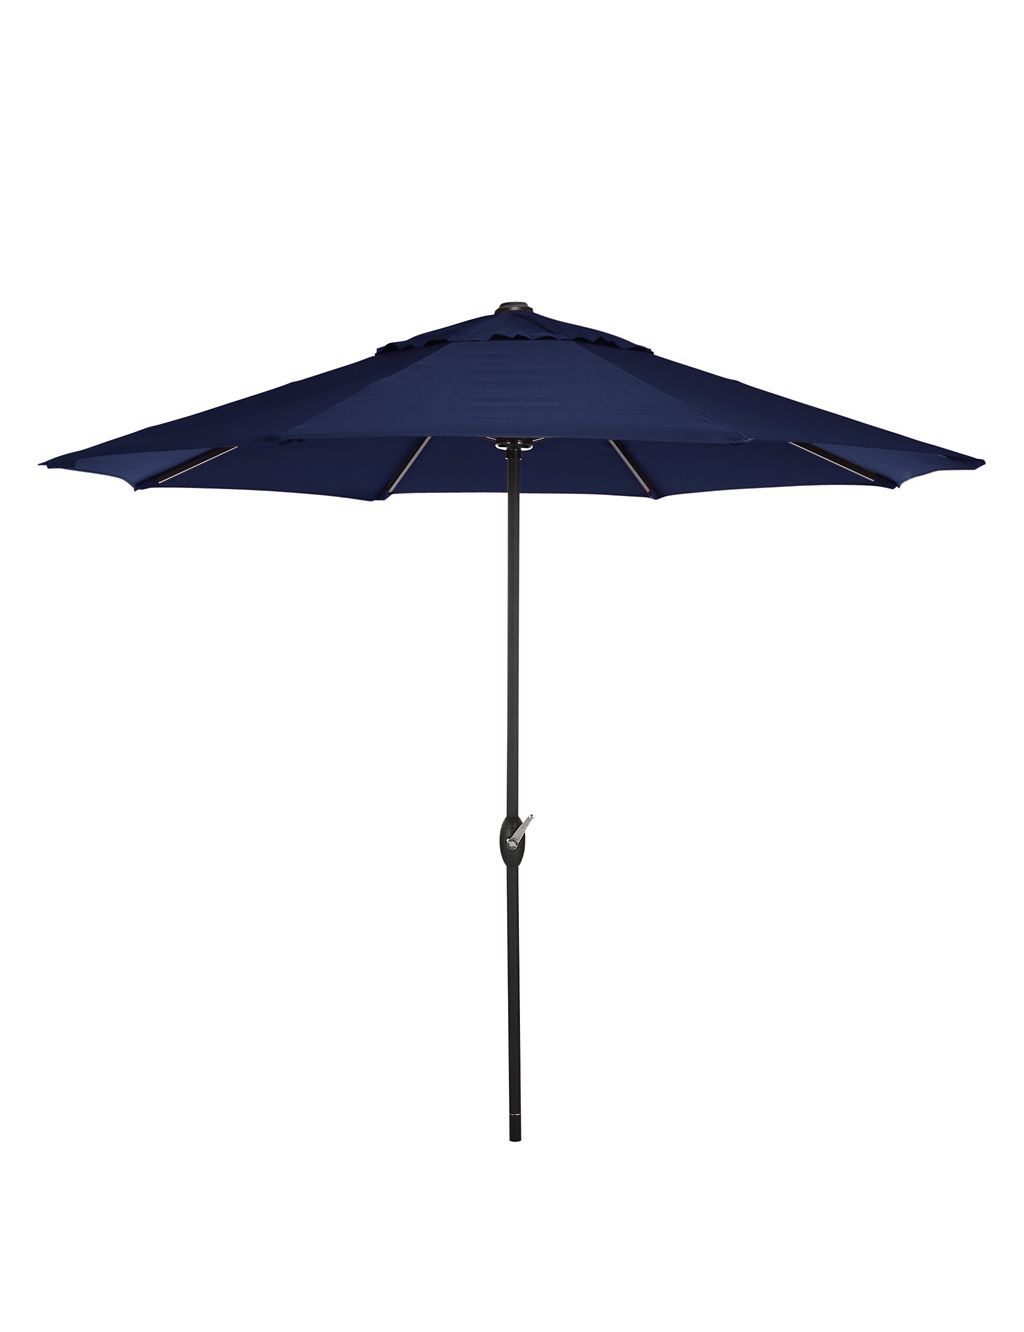 Navy Parasol with Black Pole 1 of 7